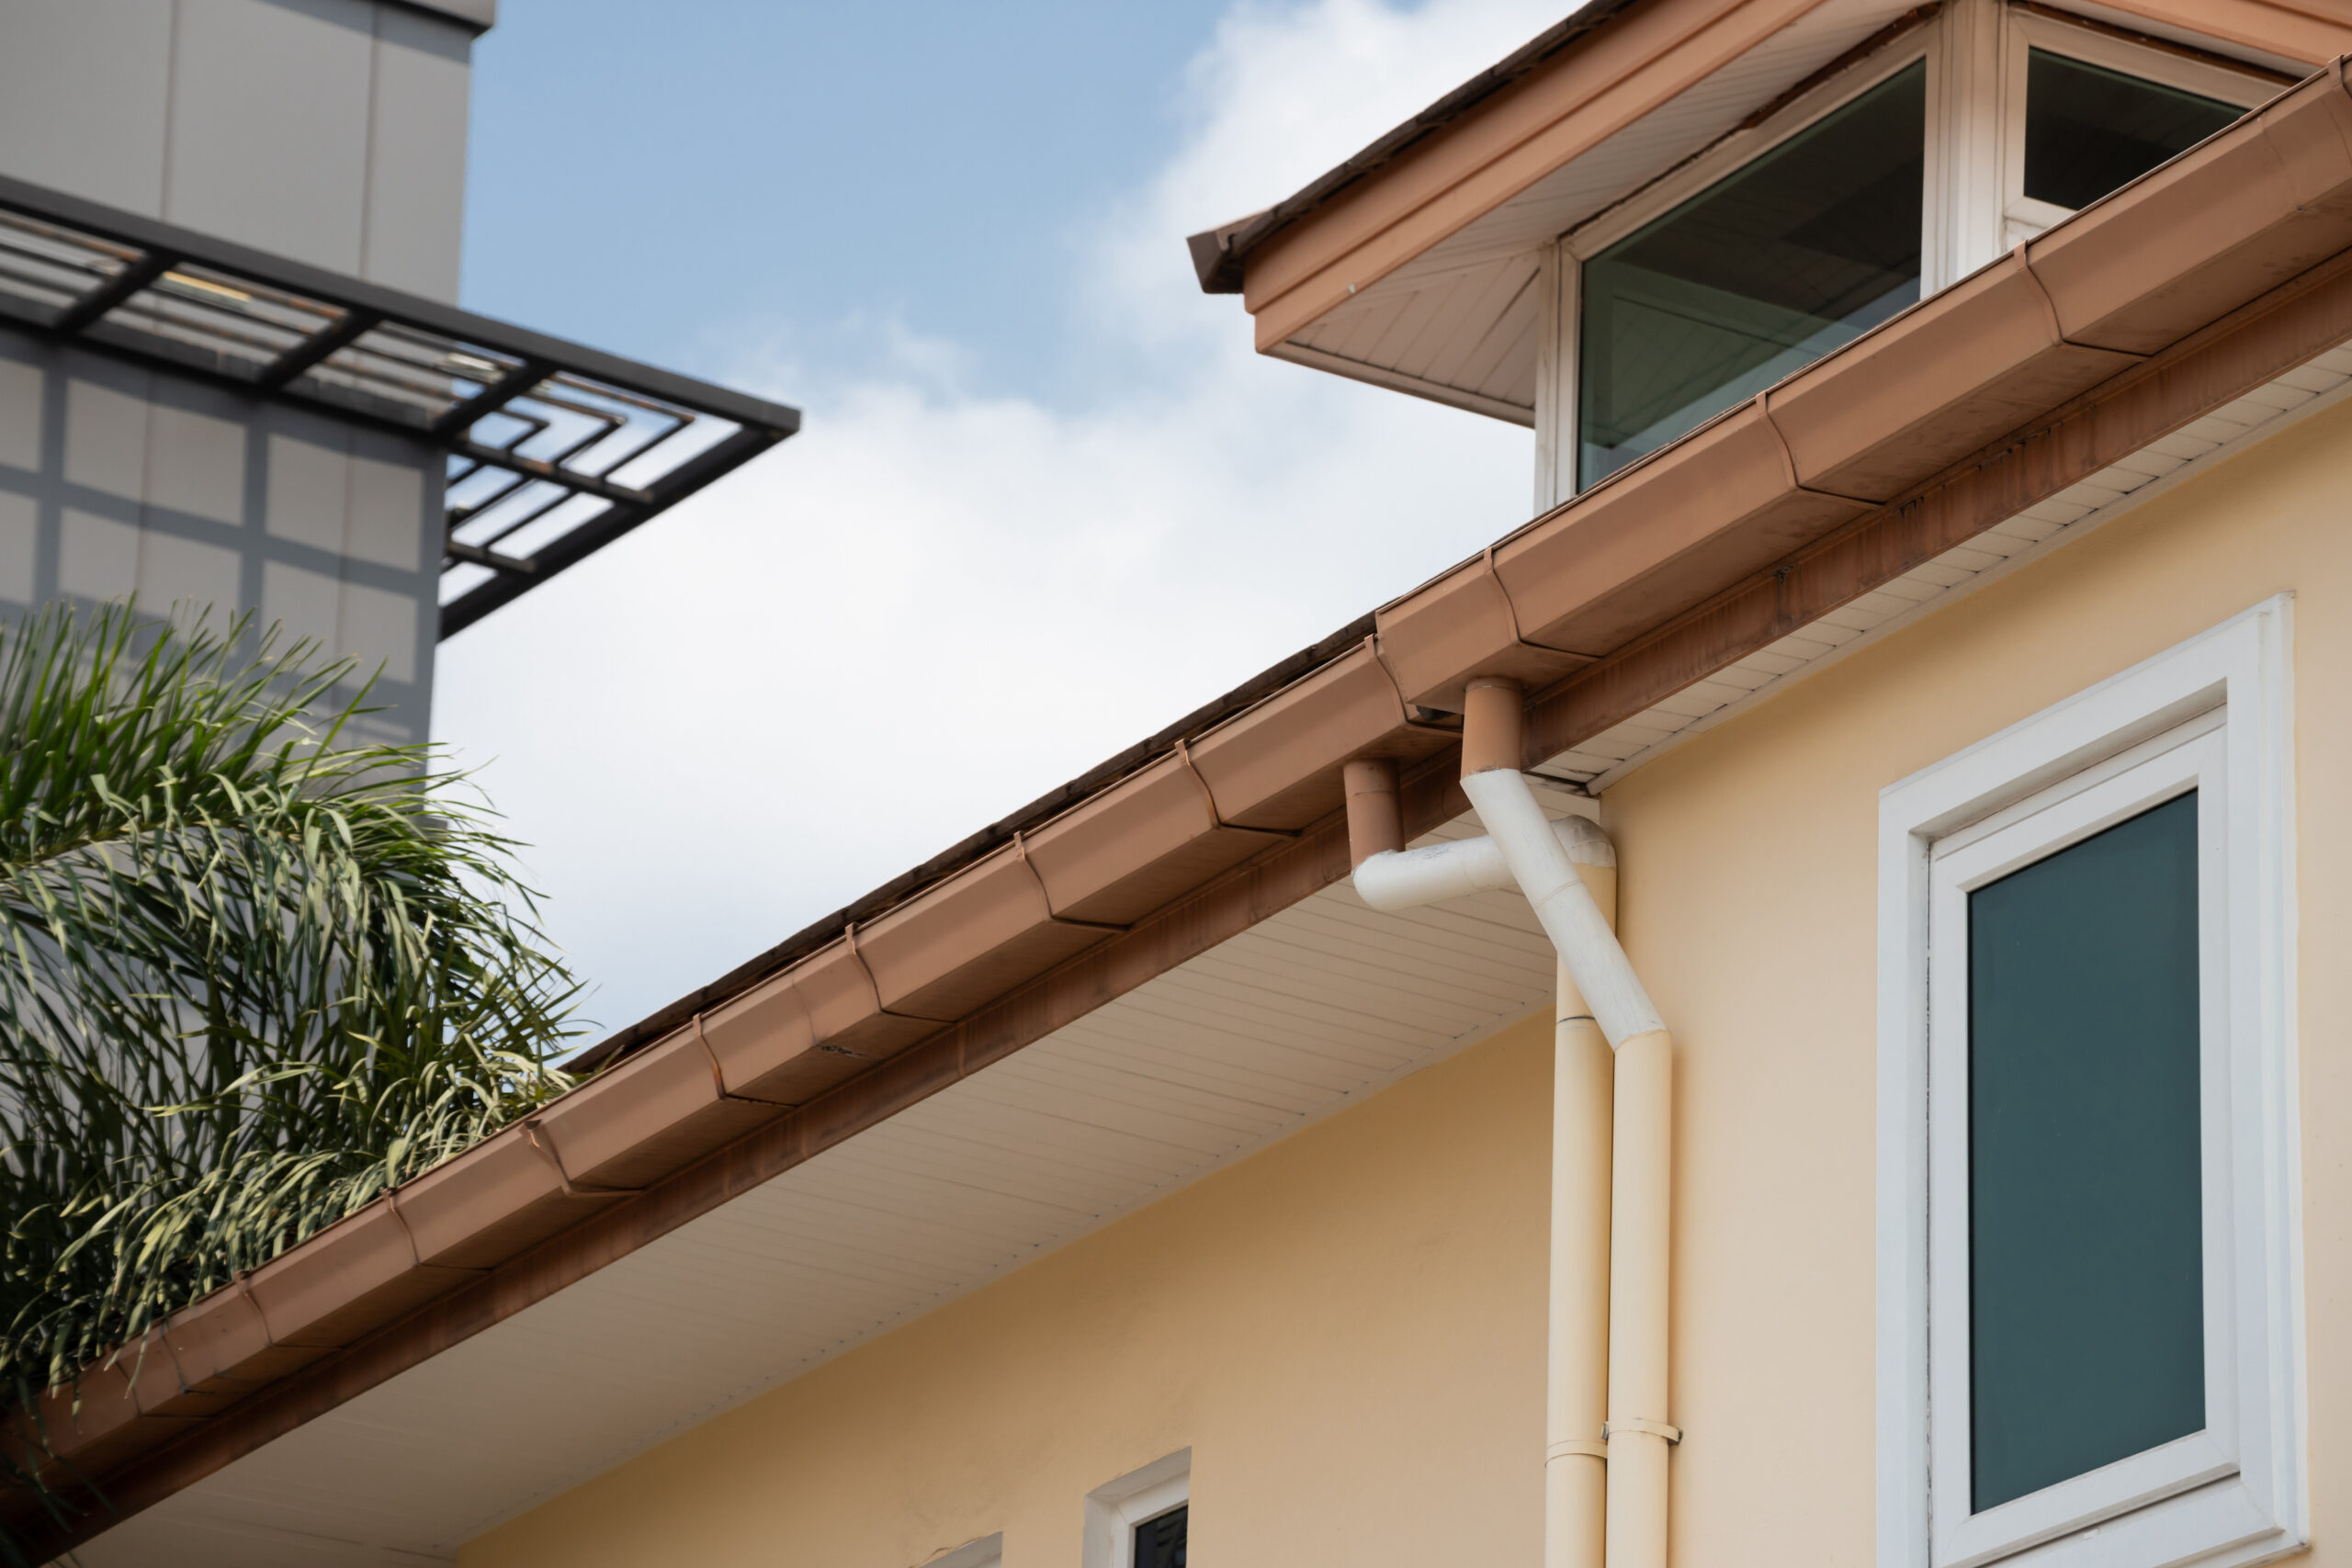 What Determines the Correct Degree of Slope for Gutters